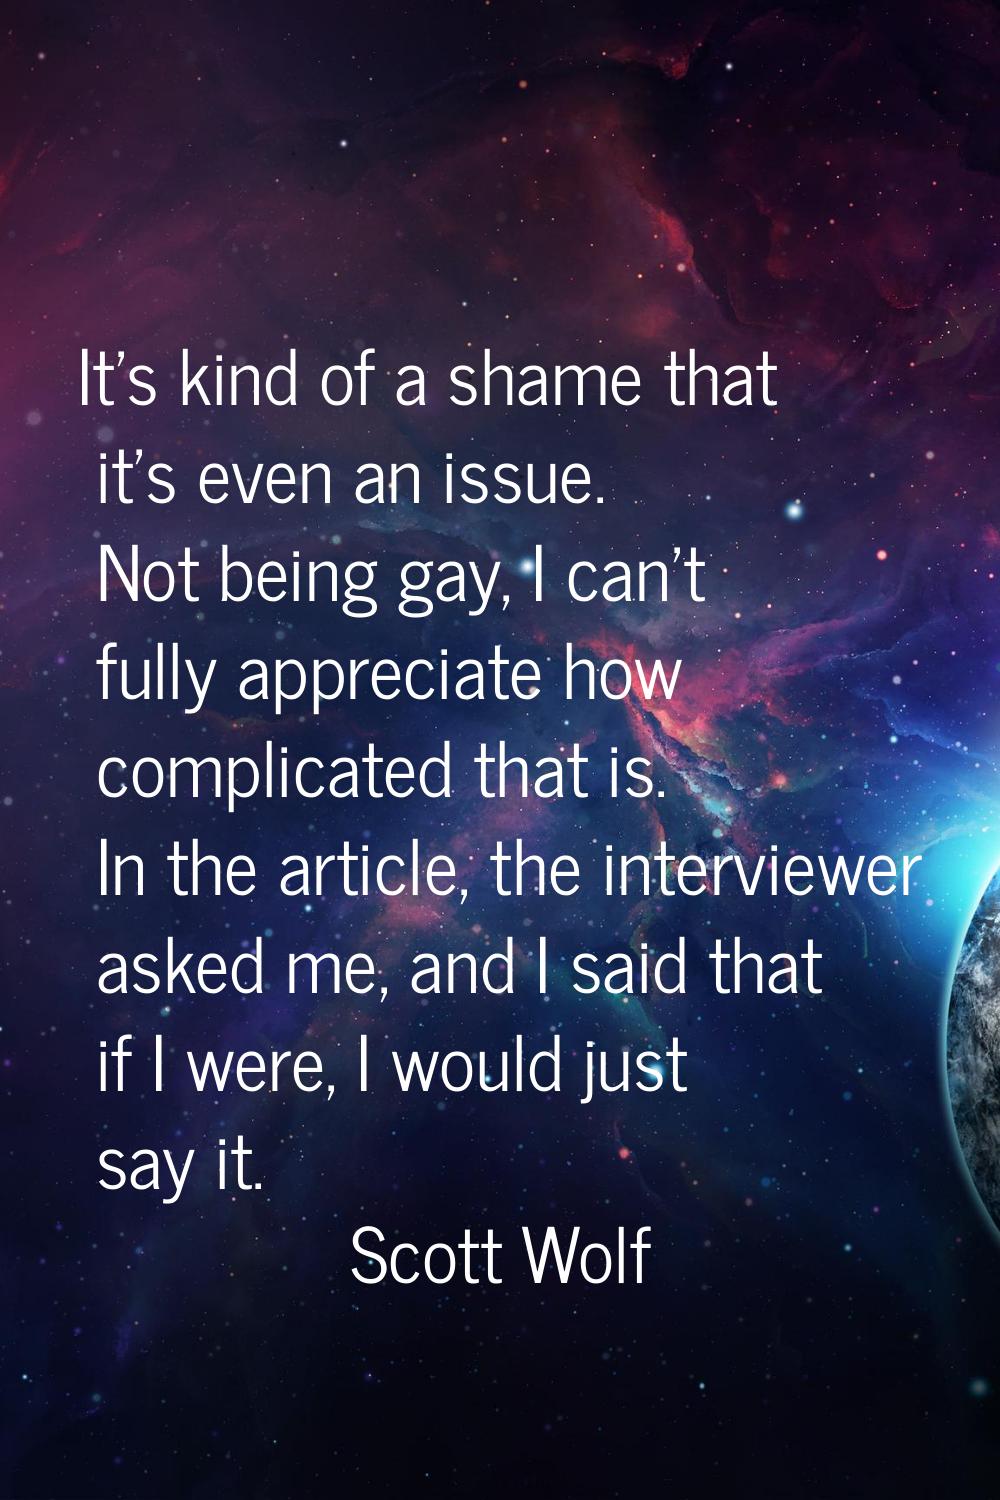 It's kind of a shame that it's even an issue. Not being gay, I can't fully appreciate how complicat